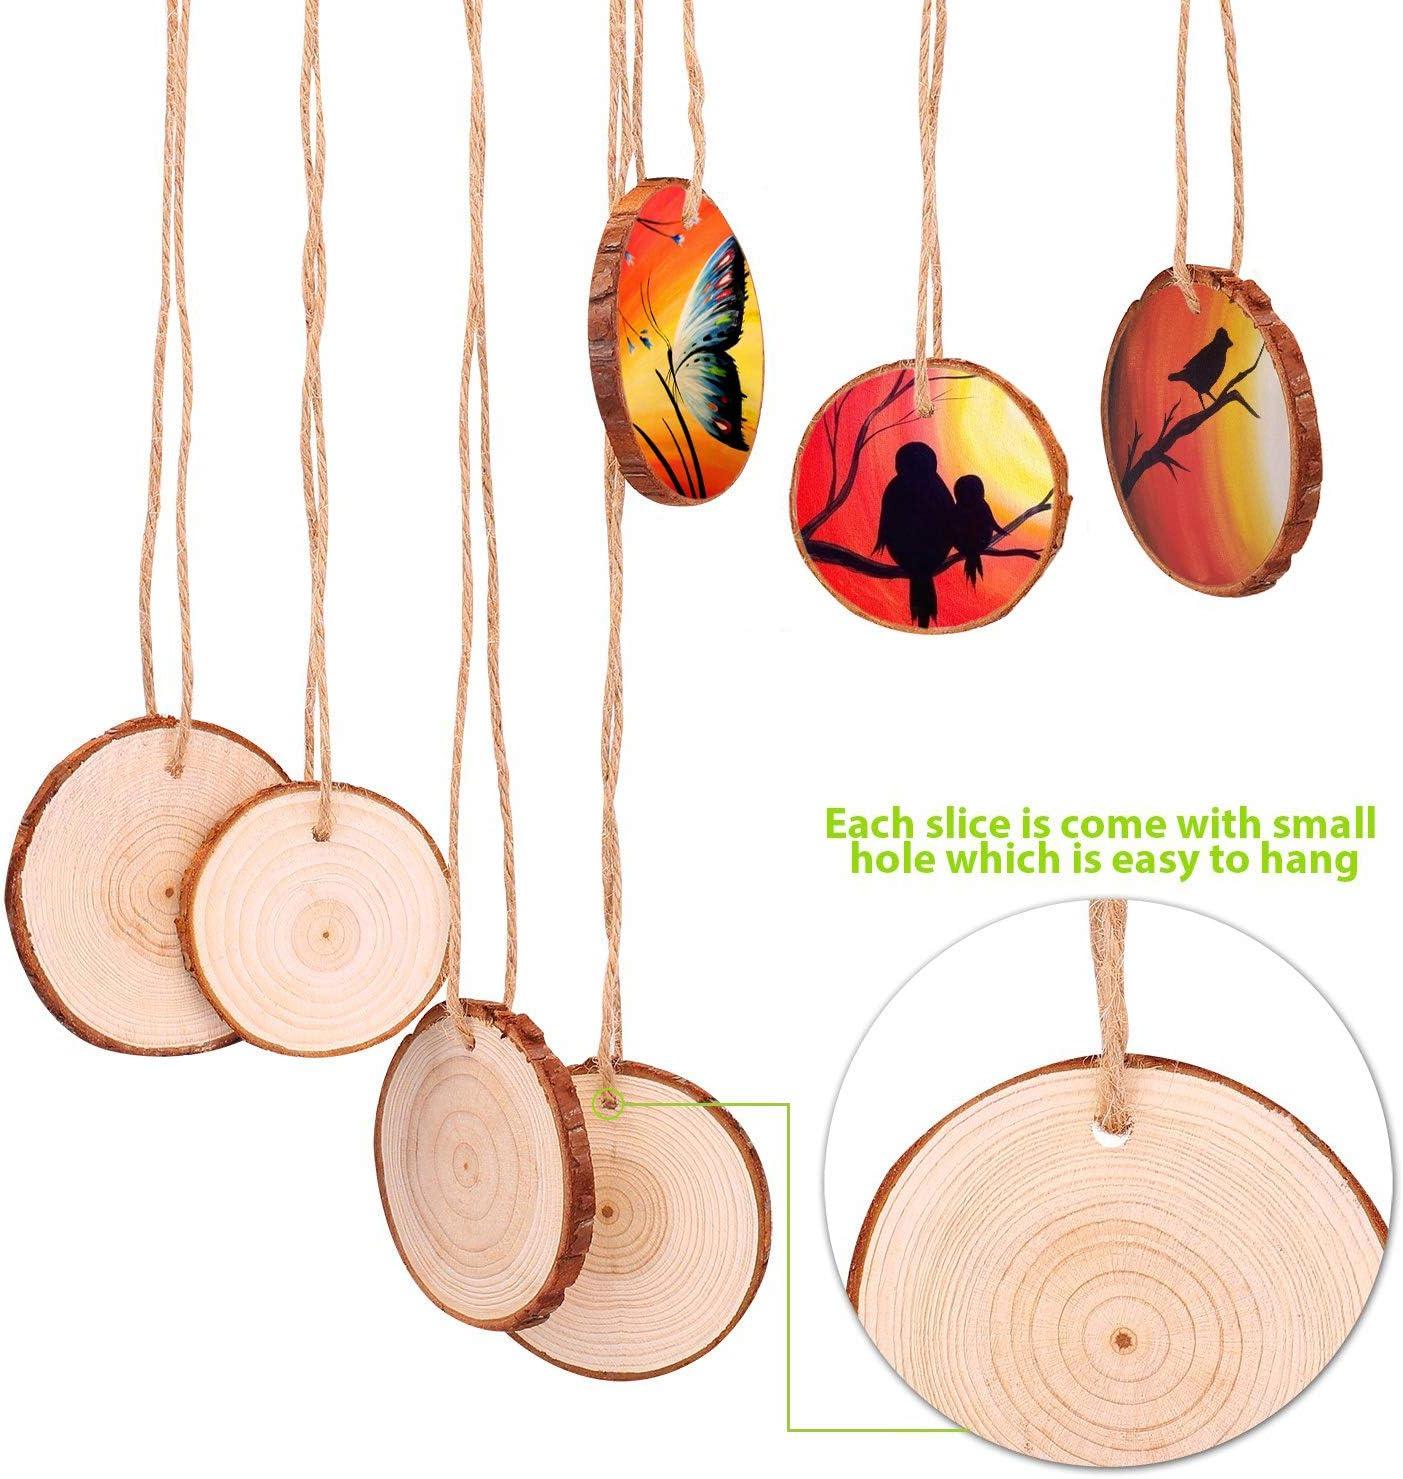 Fuyit Natural Wood Slices 30 Pcs 2.4-2.8 Inches Craft Wood Kit Unfinished  Predrilled with Hole Wooden Circles Tree Slices for Arts and Crafts  Christmas Ornaments DIY Crafts